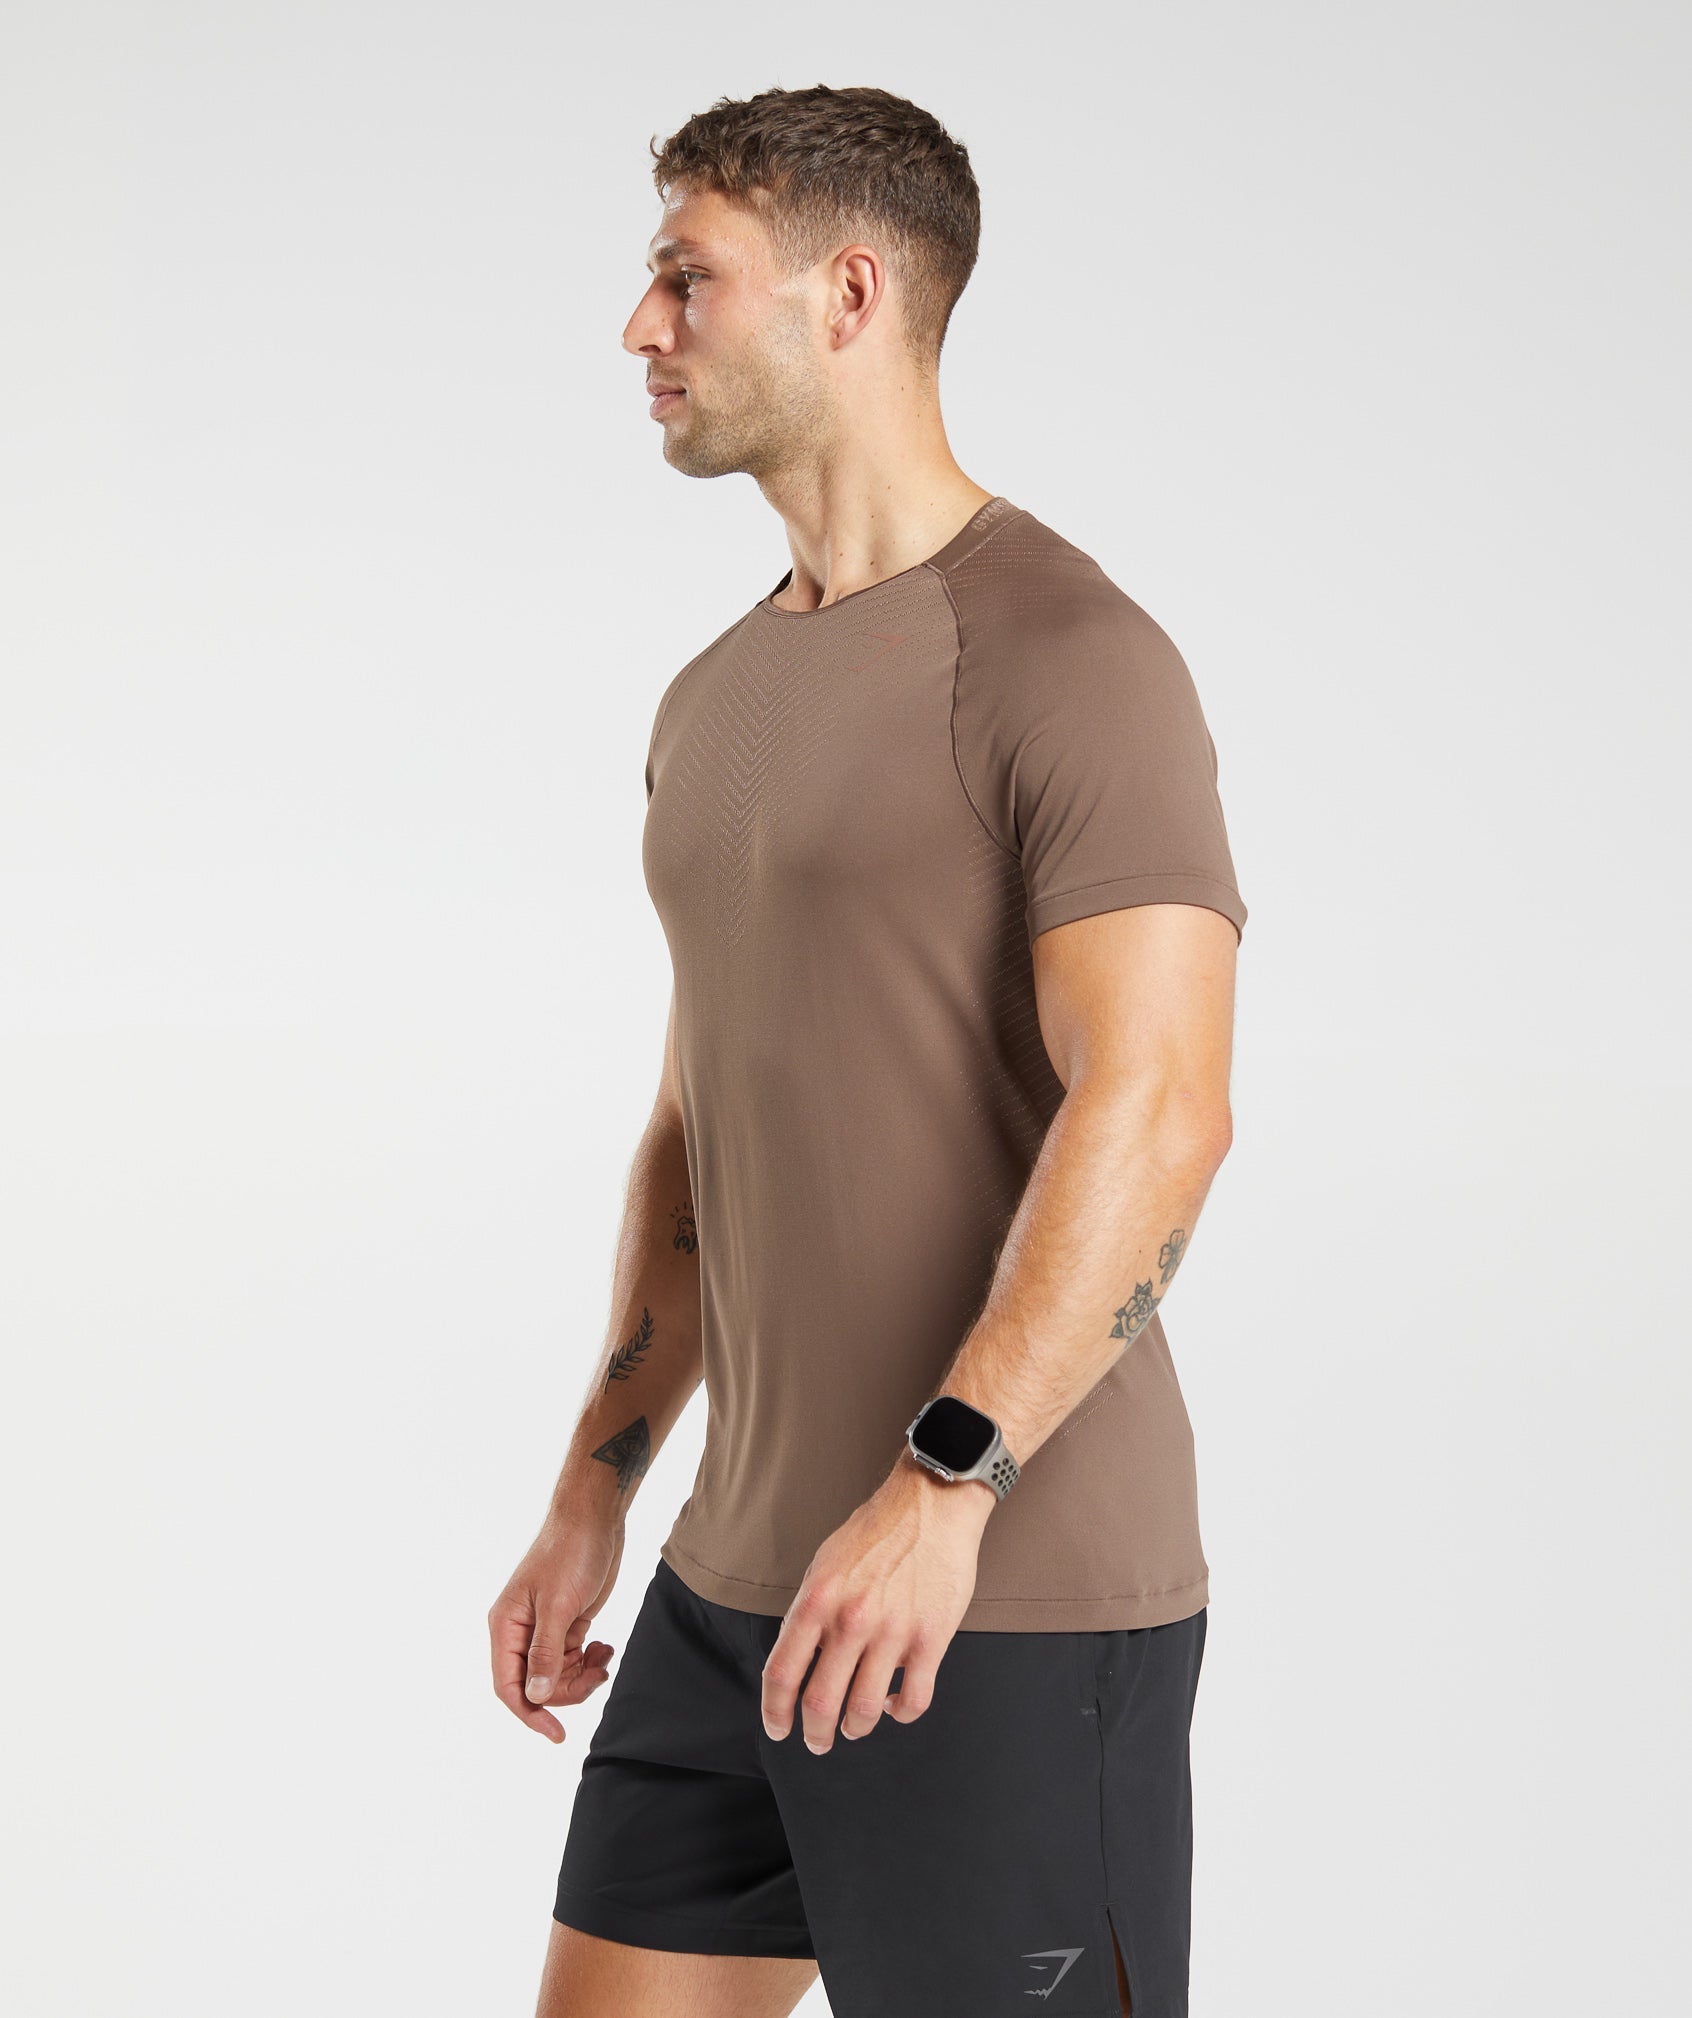 Apex Seamless T-Shirt in Soft Brown/Taupe Brown - view 3